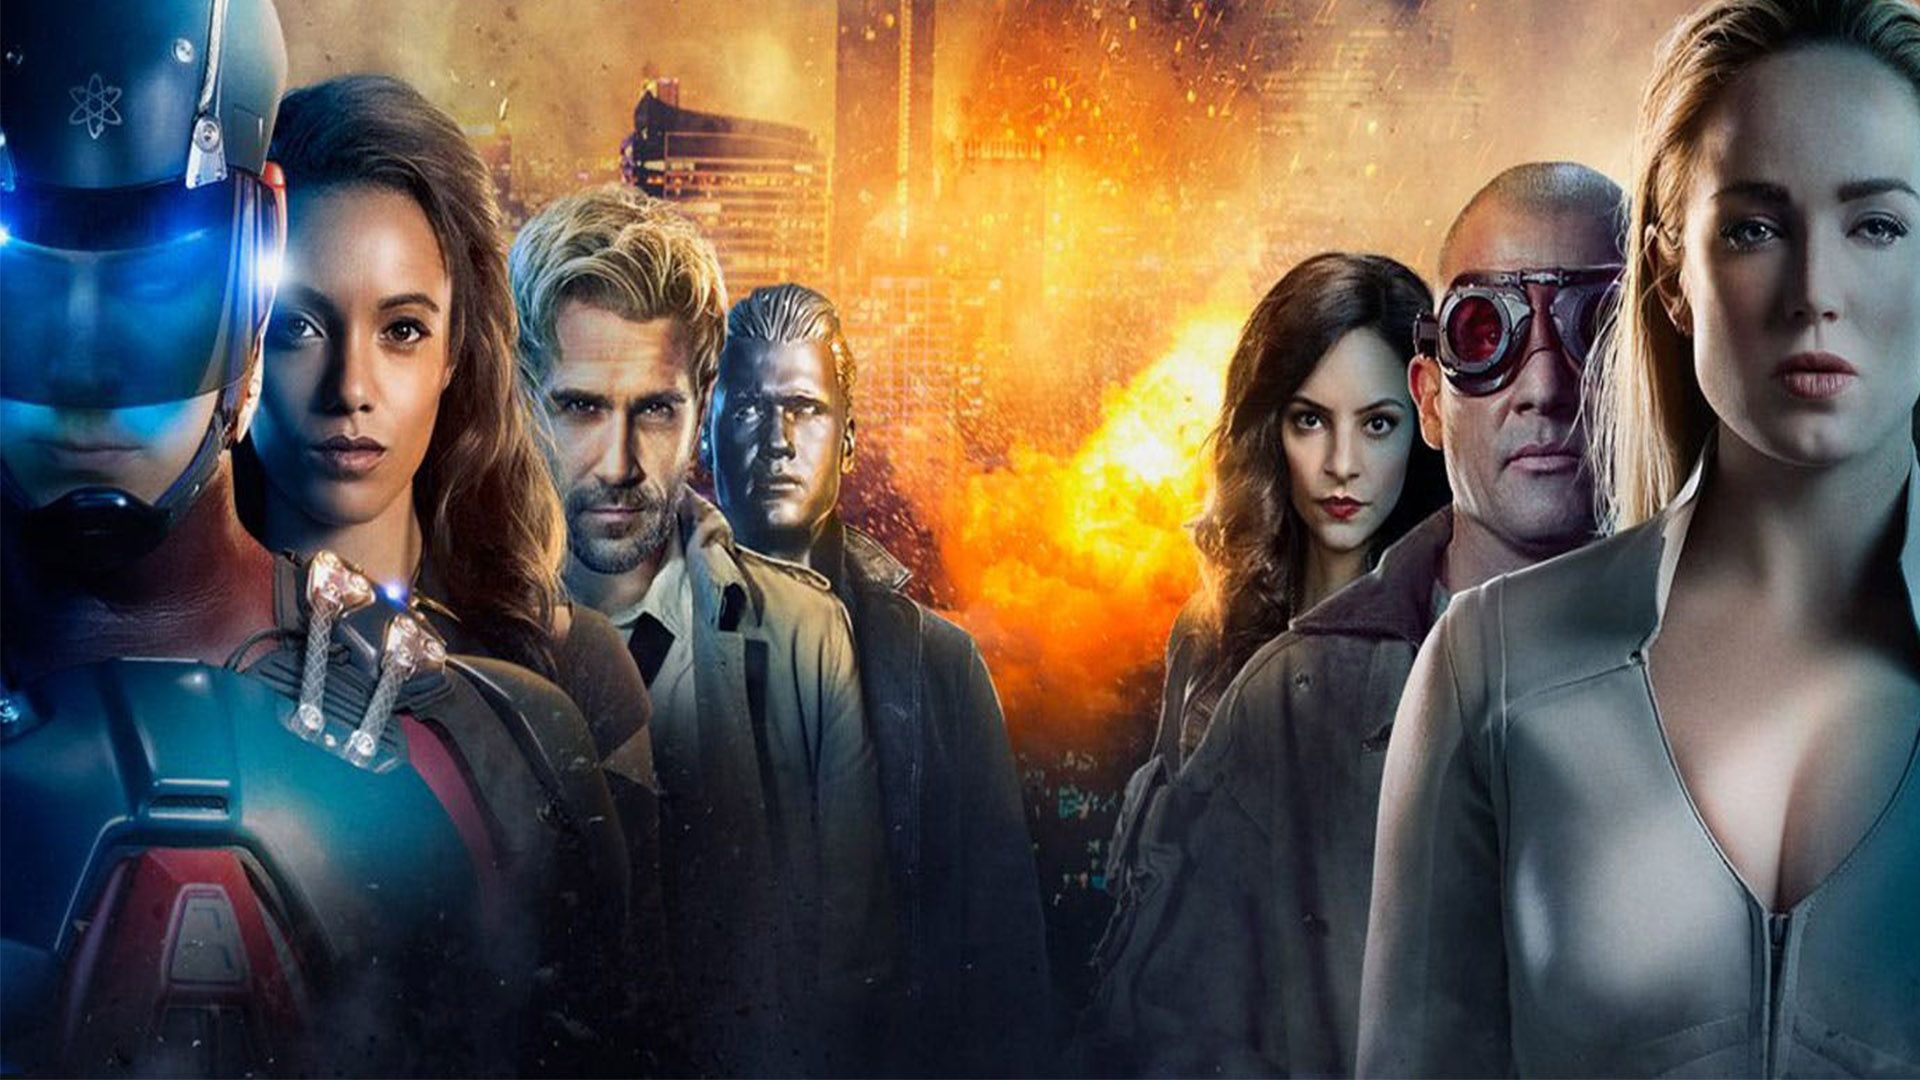 Legends of Tomorrow Wallpaper Free Legends of Tomorrow Background